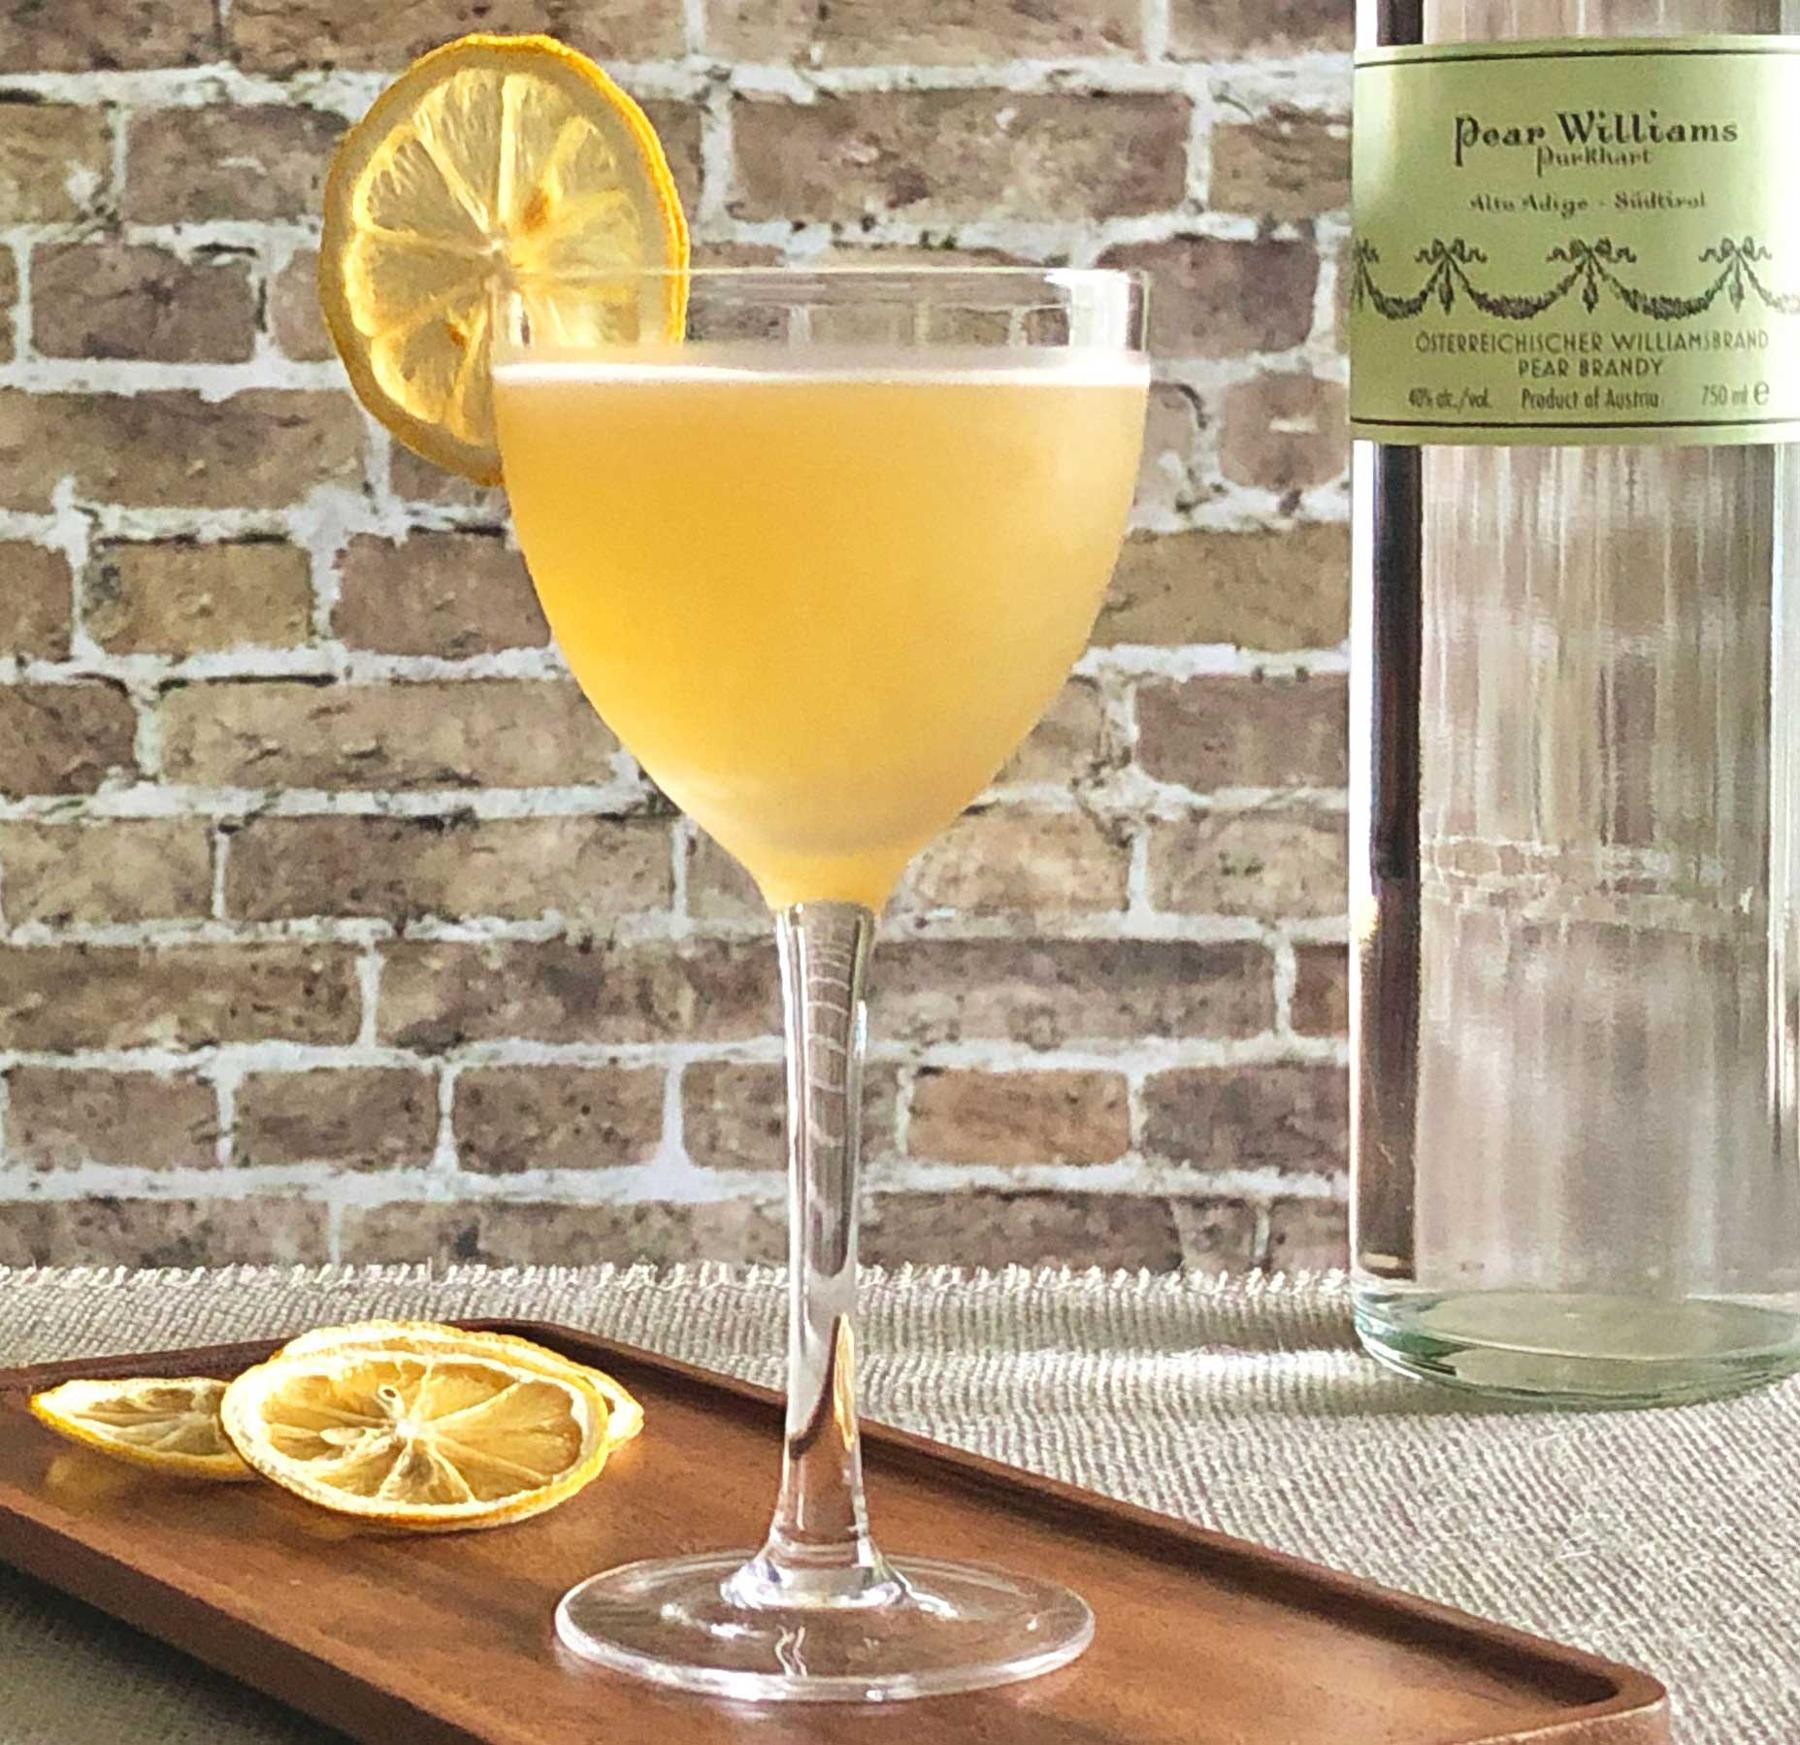 An example of the Good Christian Pear, the mixed drink (drink), by David Burnette, South on Main, Little Rock, Arkansas, featuring Purkhart Pear Williams Eau-de-Vie, honey syrup, lemon juice, pastis, pear, and lemon wheel; photo by Lee Edwards